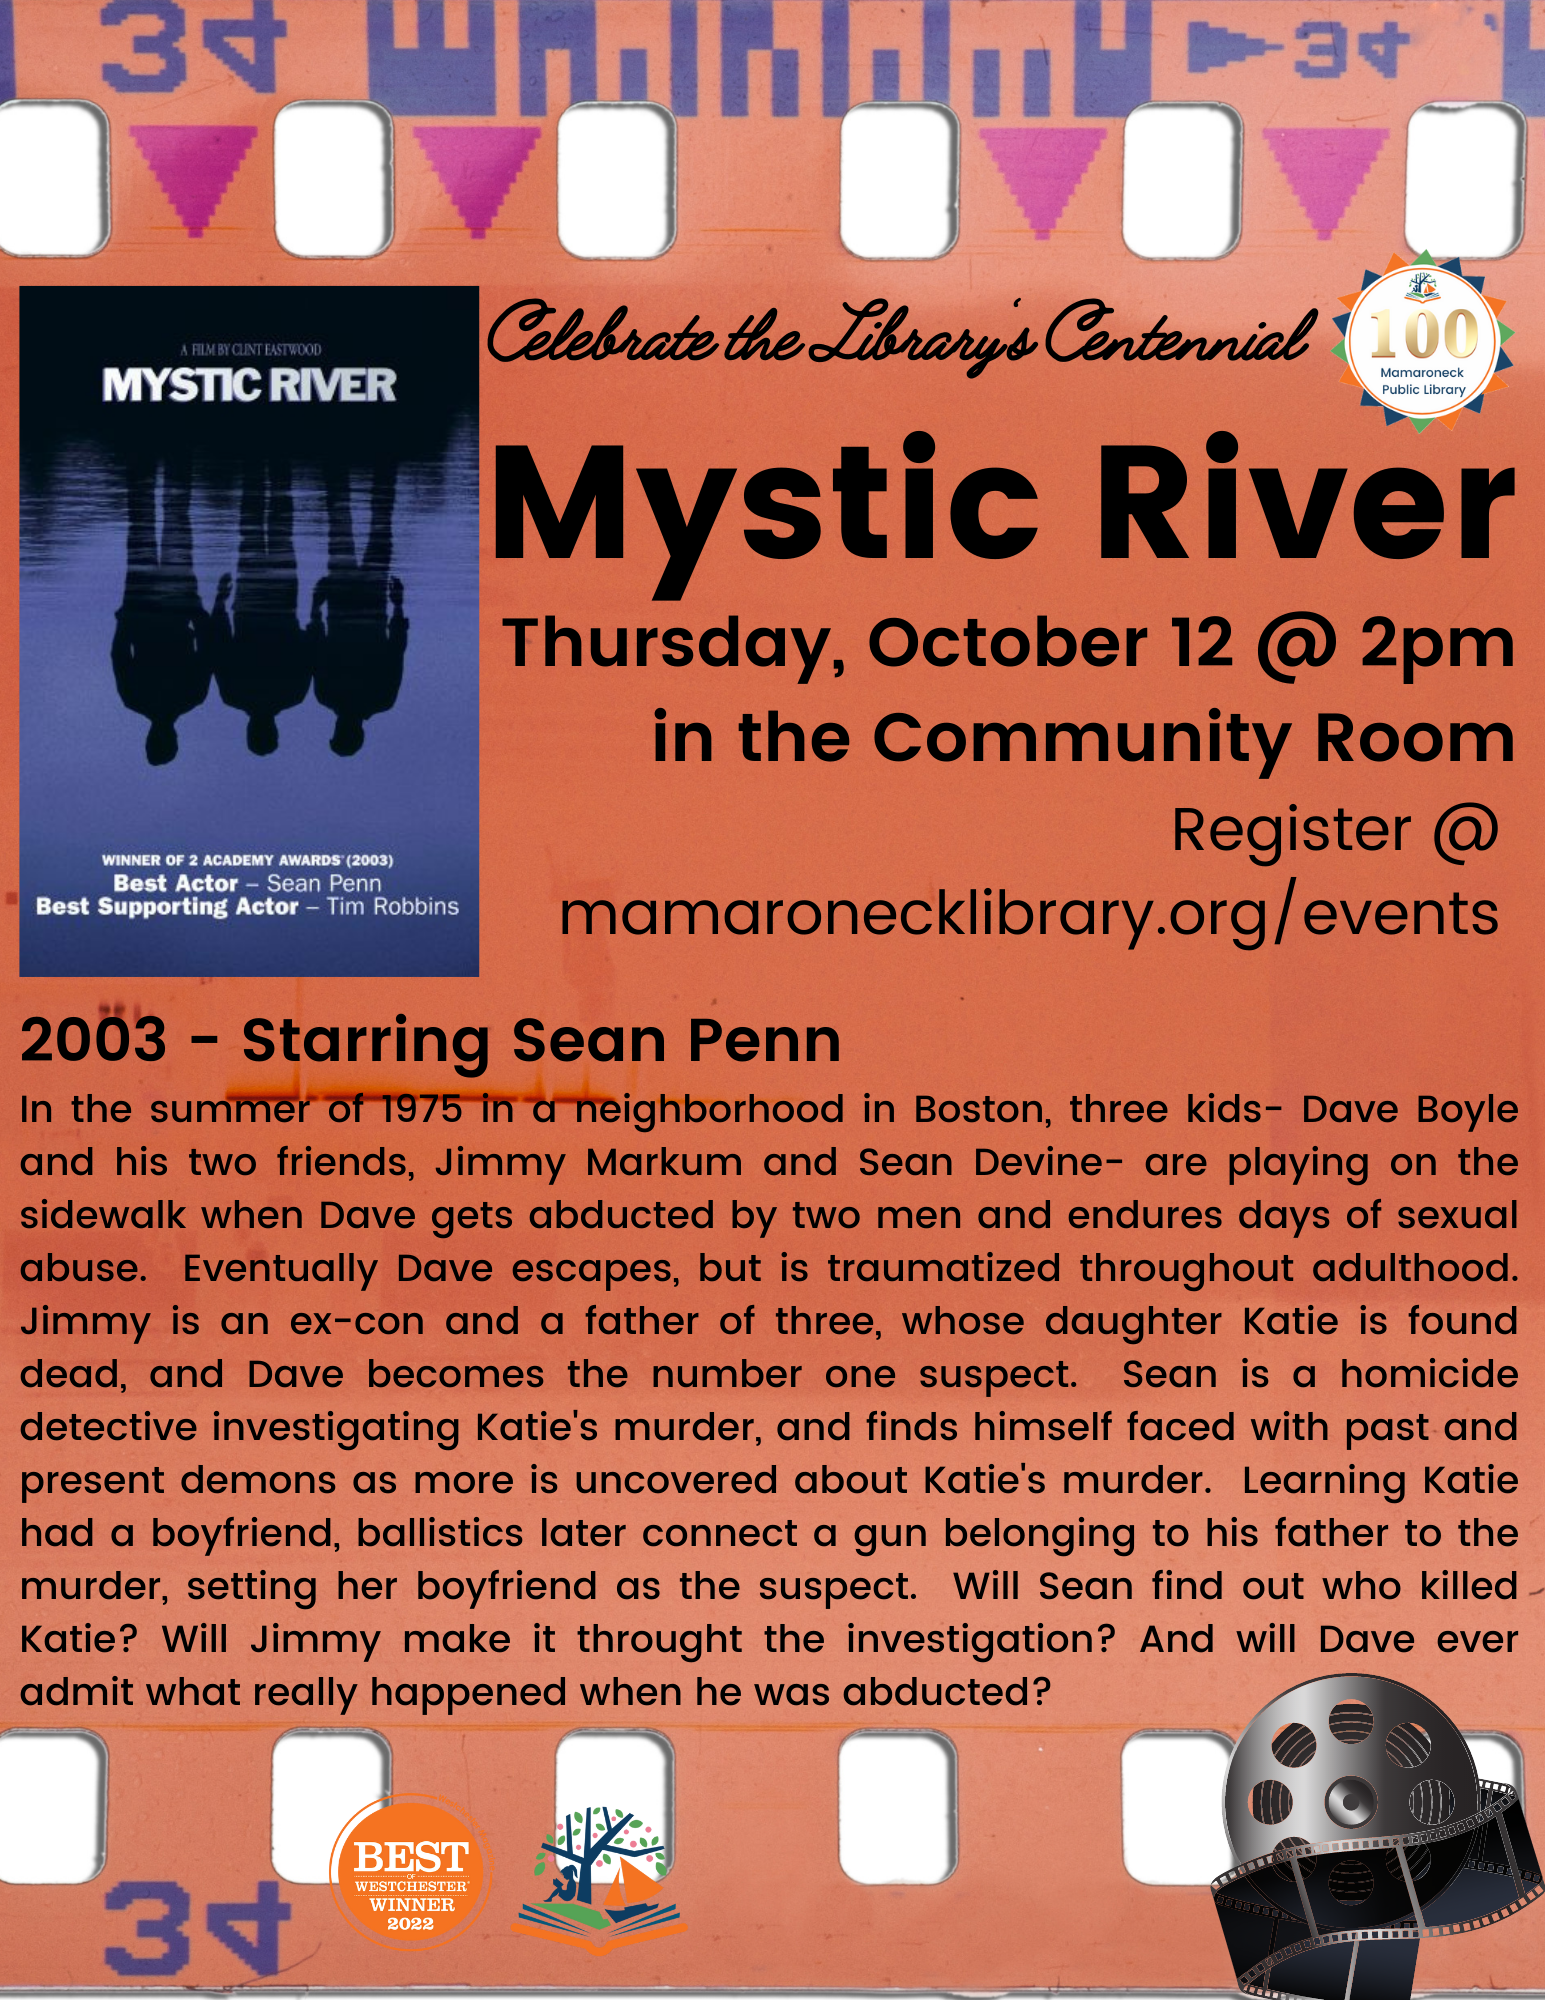 10/12 @ 2pm in the community room: Mystic River